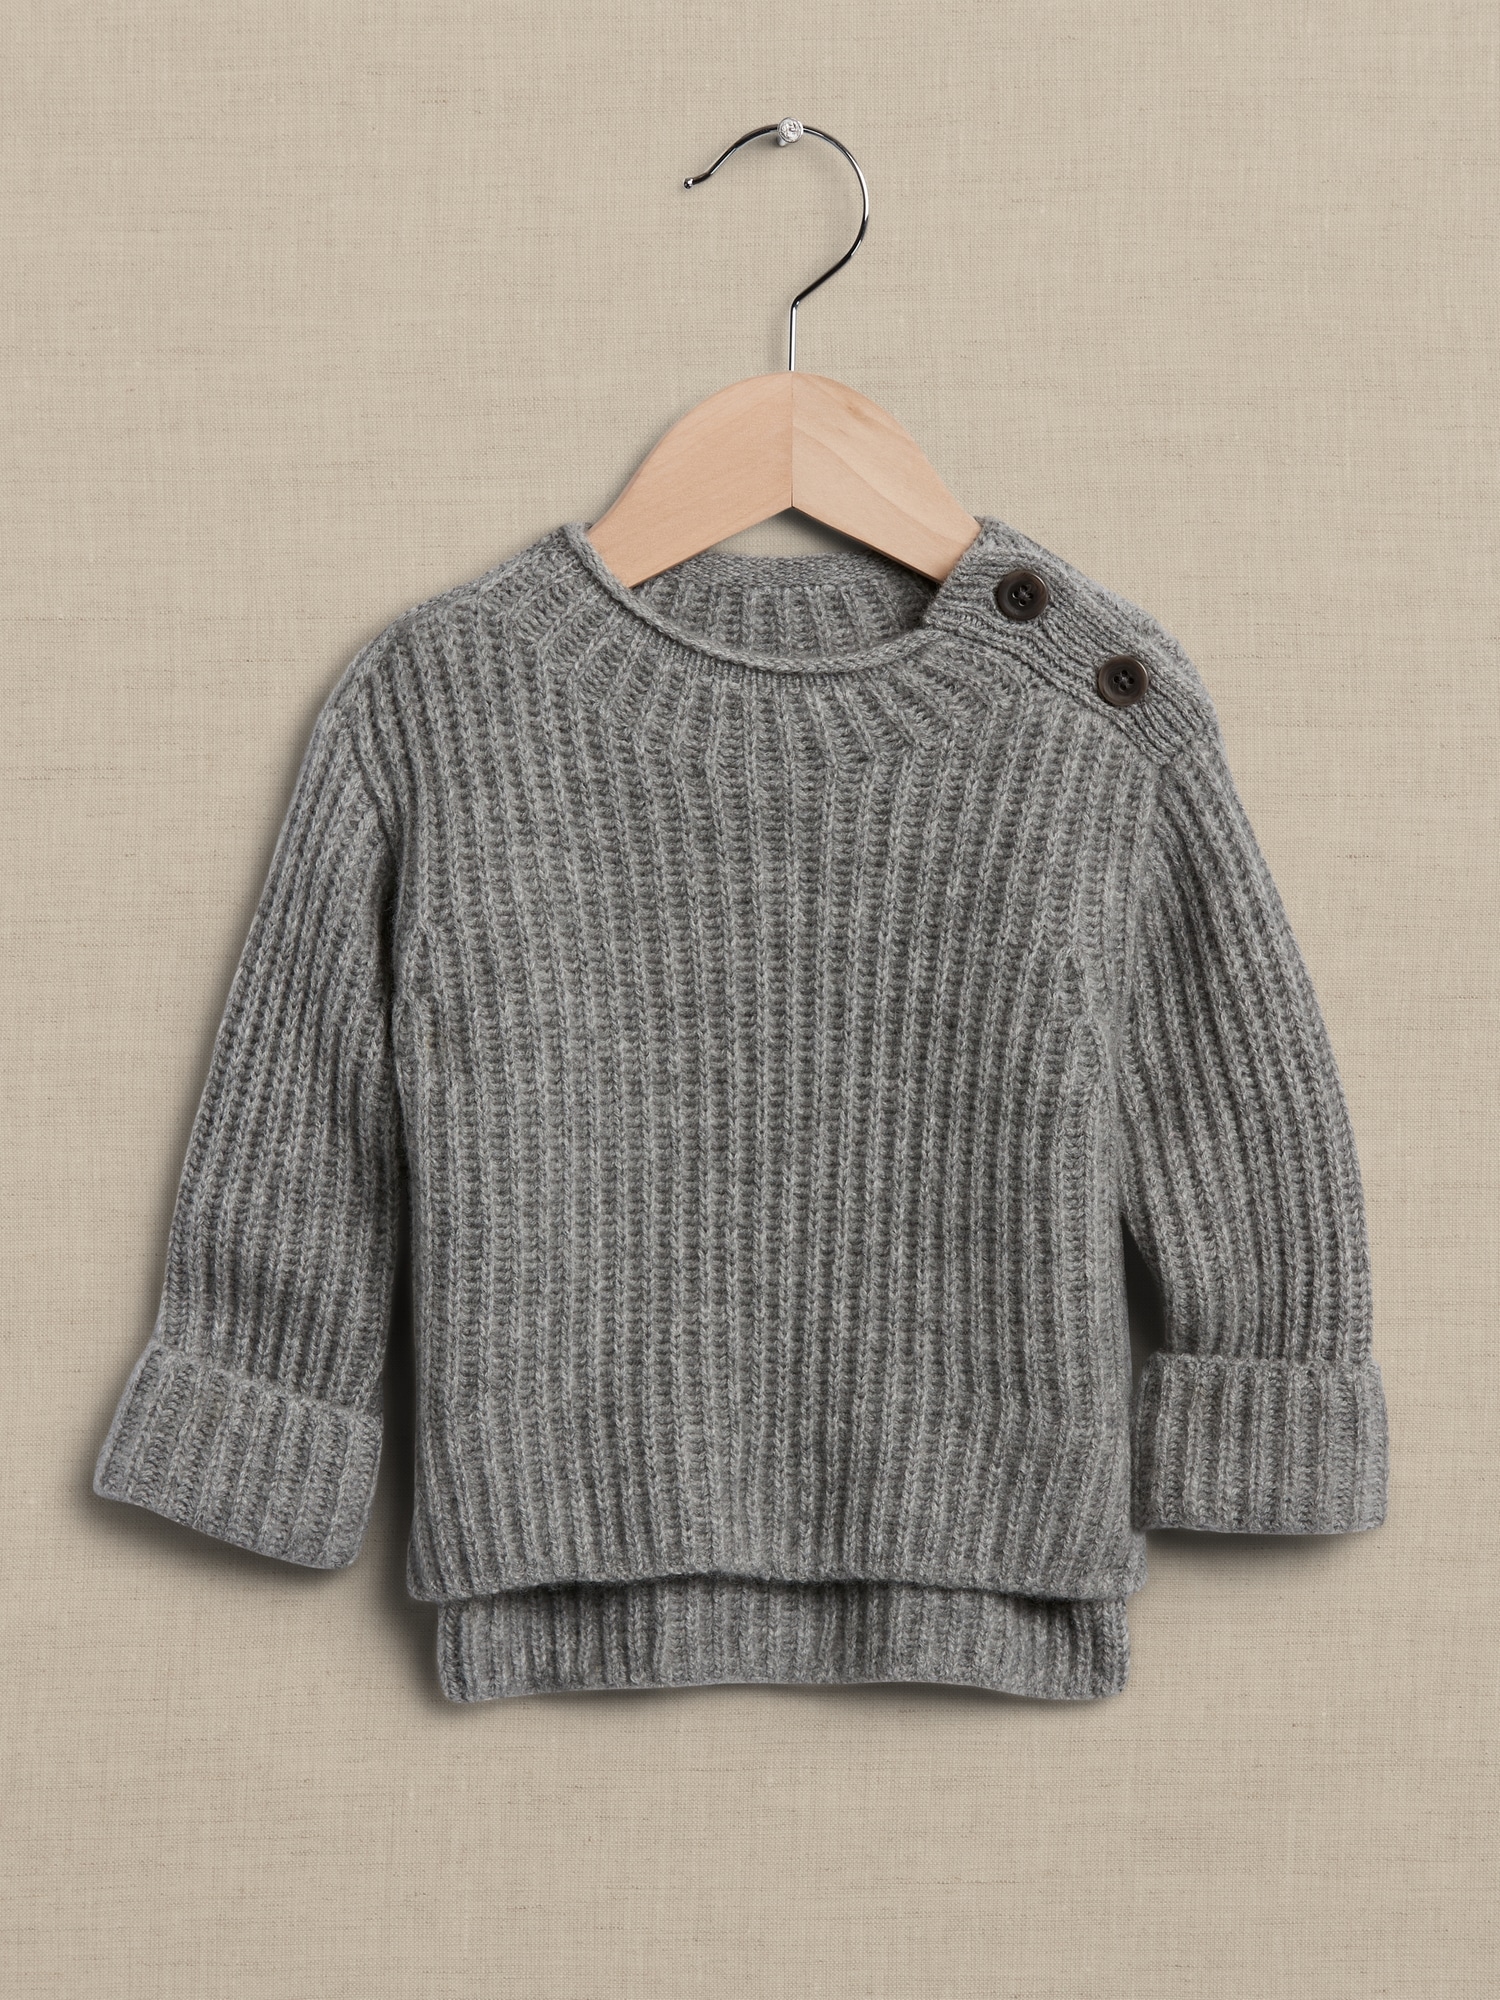 Banana Republic Cashmere Mock-Neck Sweater for Baby gray. 1